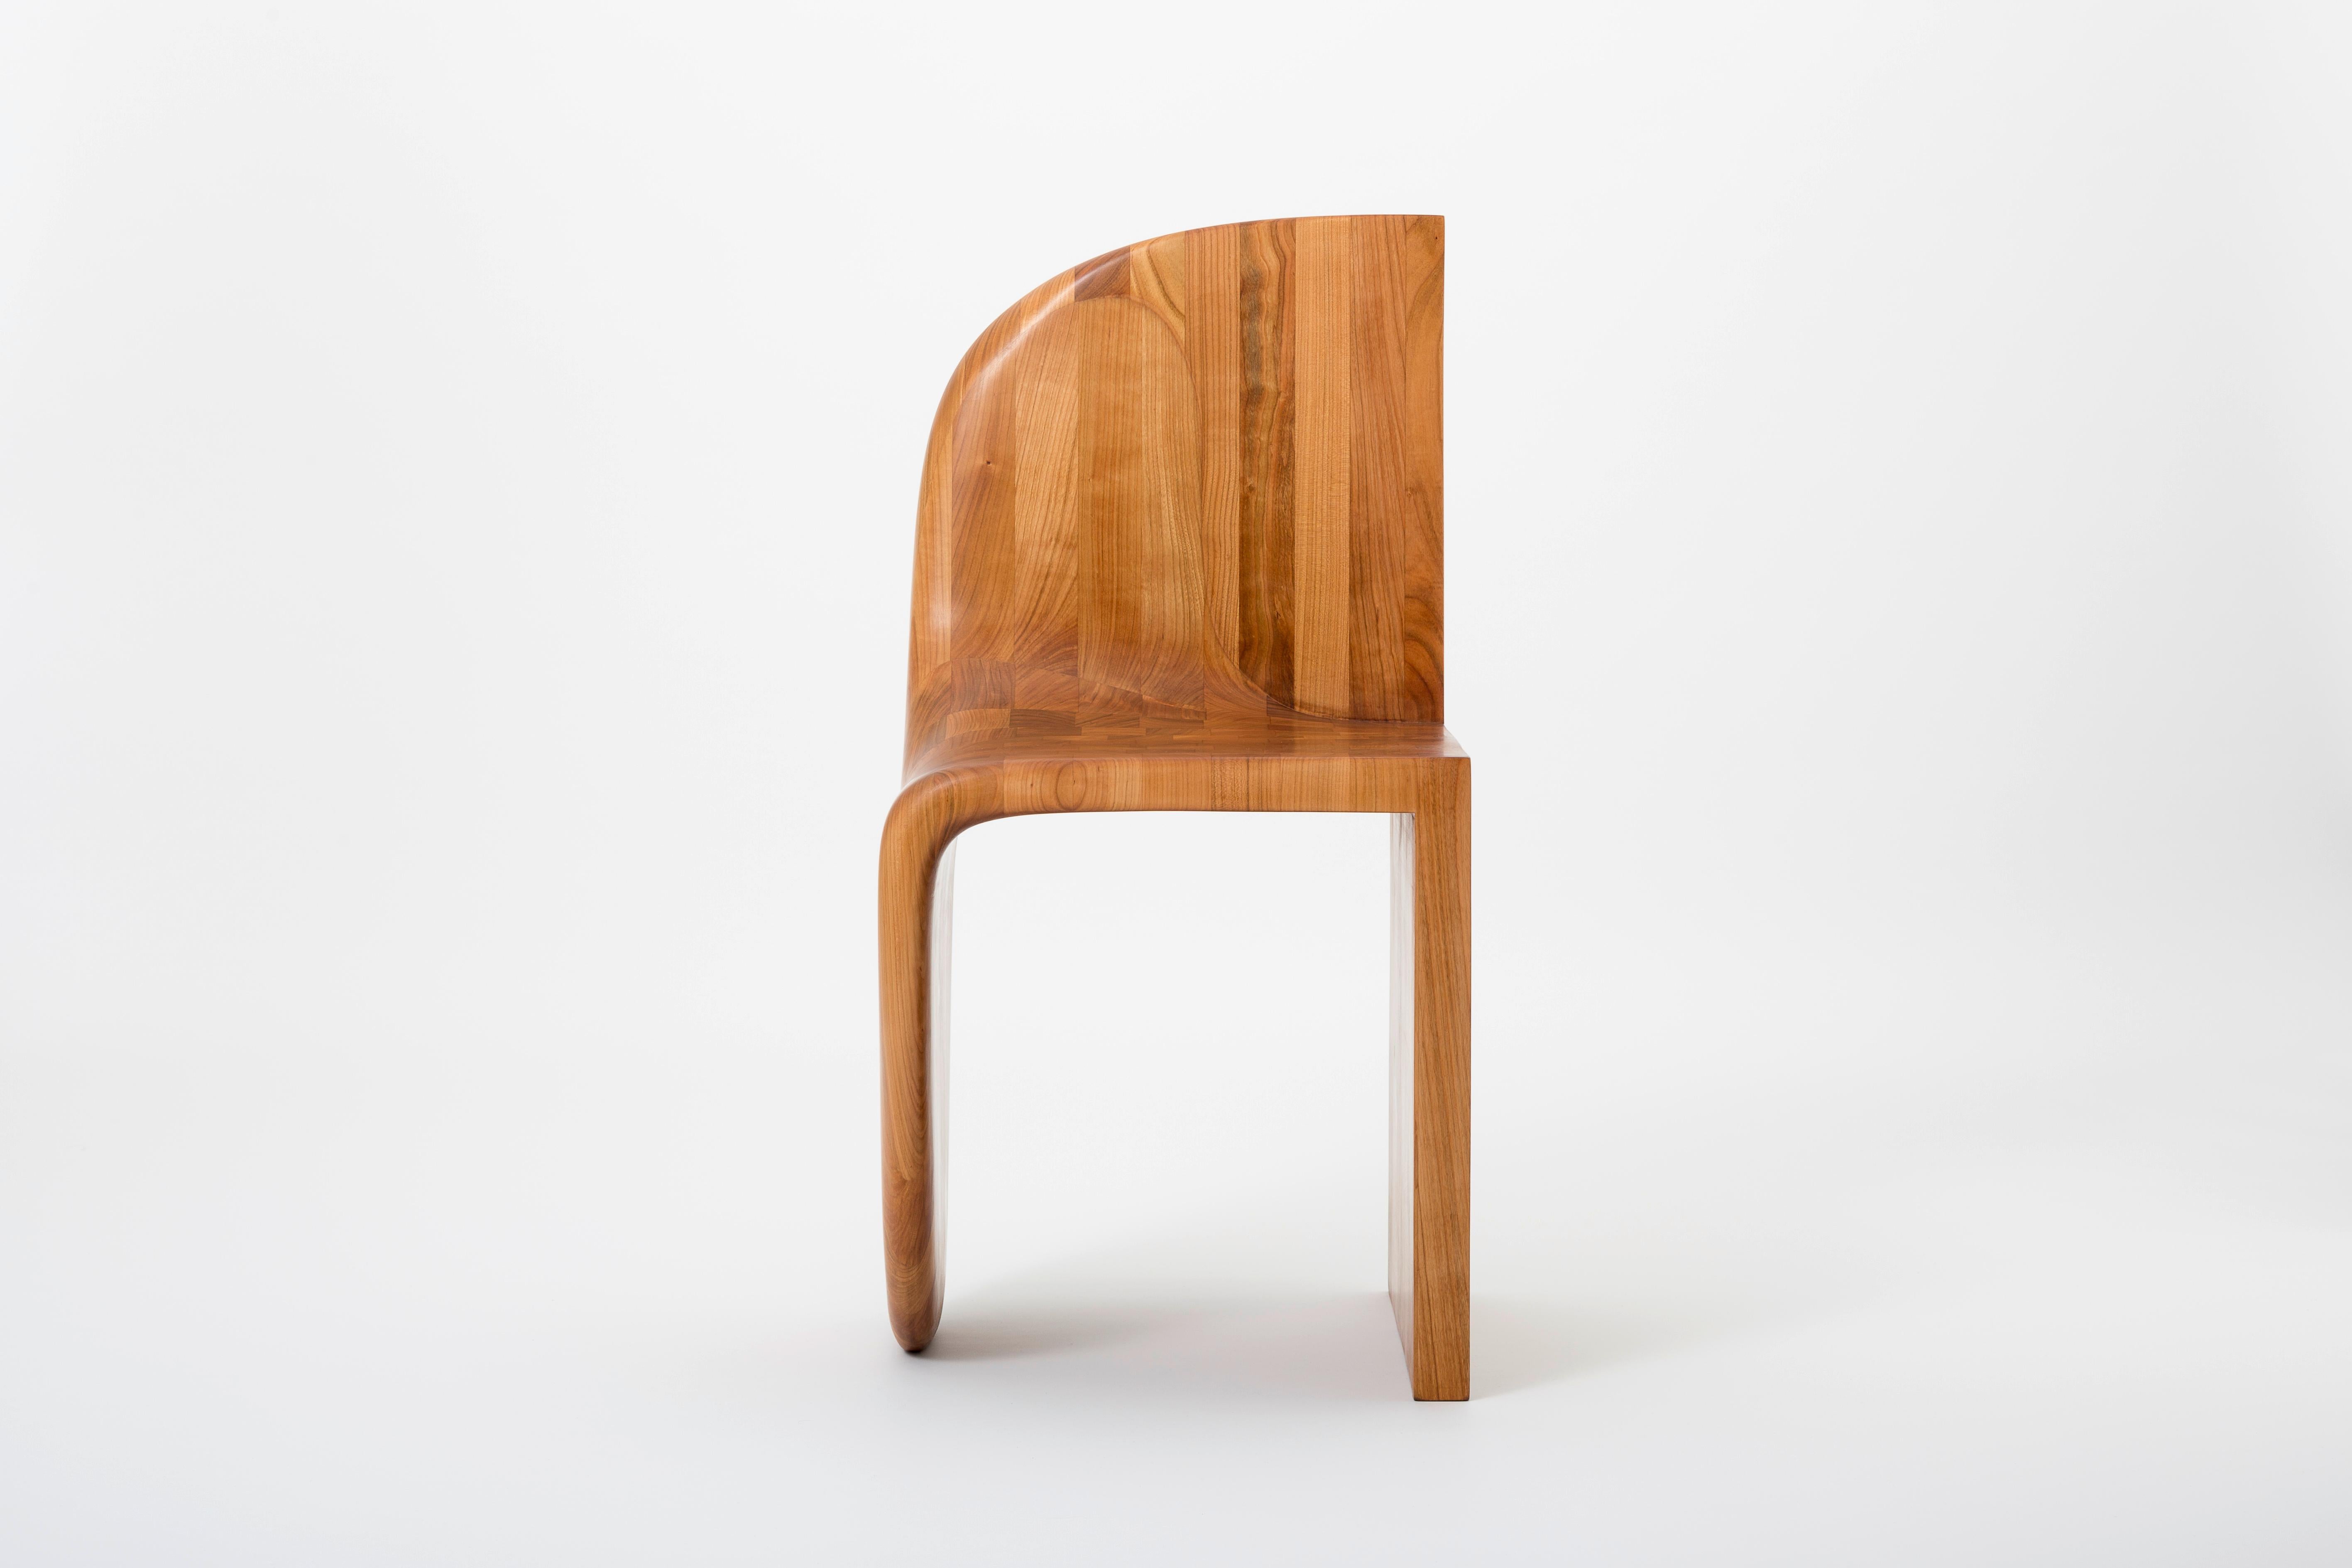 Polymorph chair by Philipp Aduatz
2017
Edition of 4 + 2 A/P
Dimensions: 43 x 48 x 85 cm
Materials: Hand carved cherrywood, oiled and polished

The idea of the Polymorph Chair is to unify contrary design concepts in a single shape.

In the